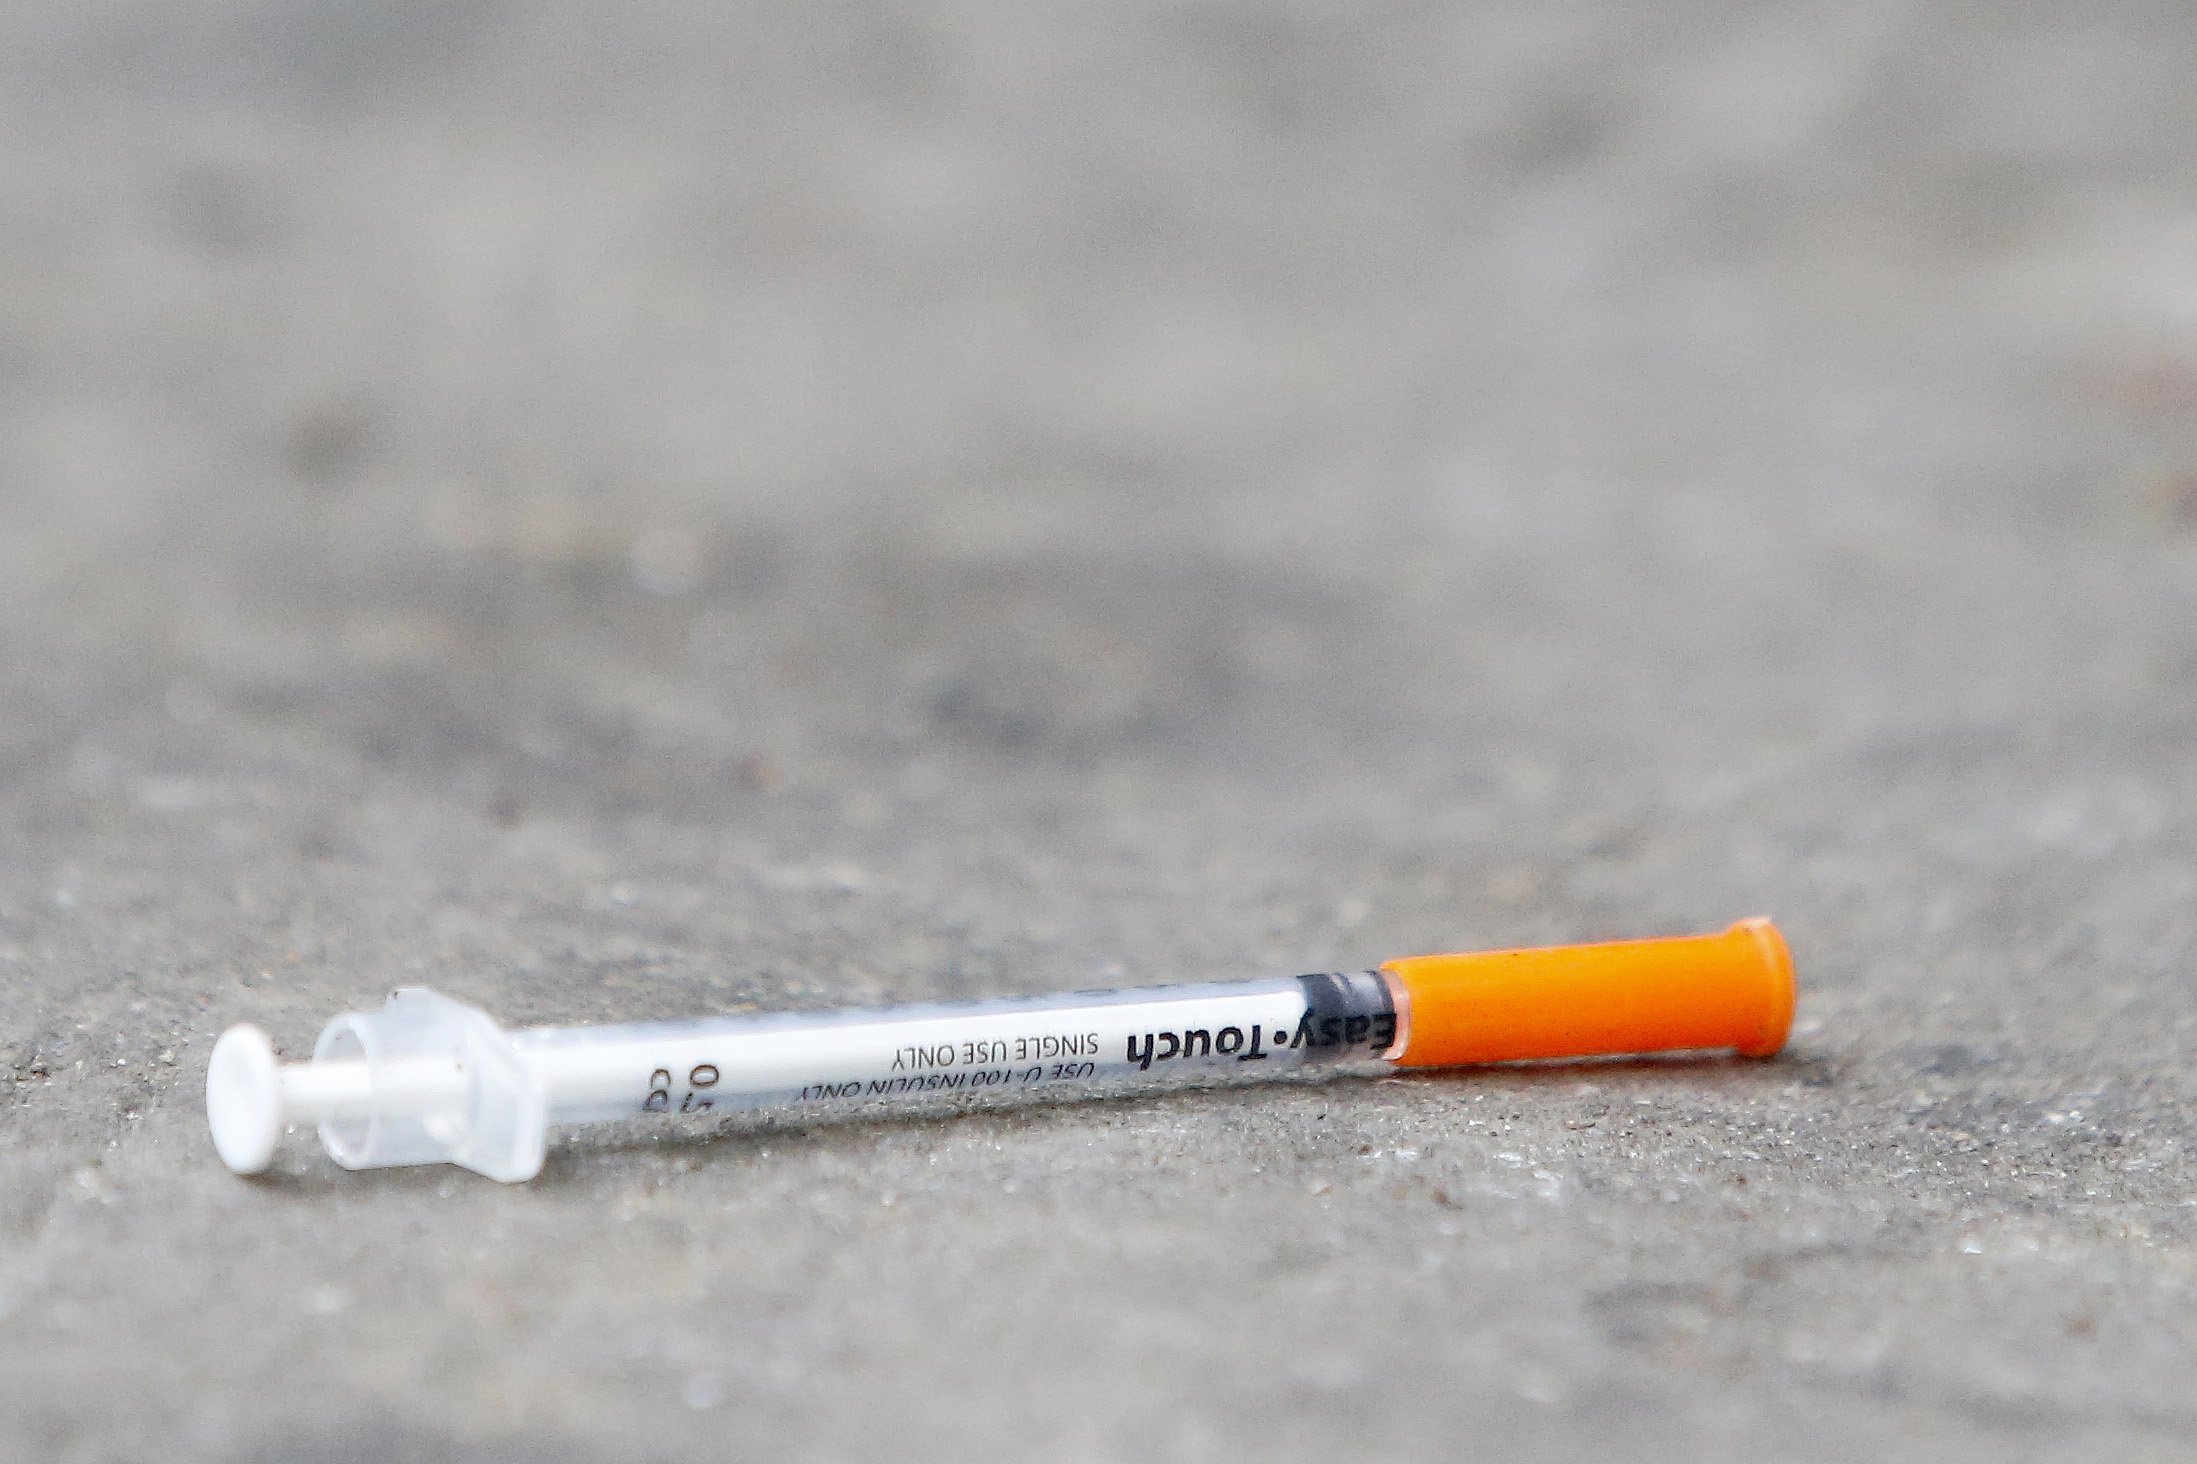 N J Made It Legal For Drug Users To Buy Syringes But Not Possess Them New Bill Could Fix This Legal Quandary Nj Com